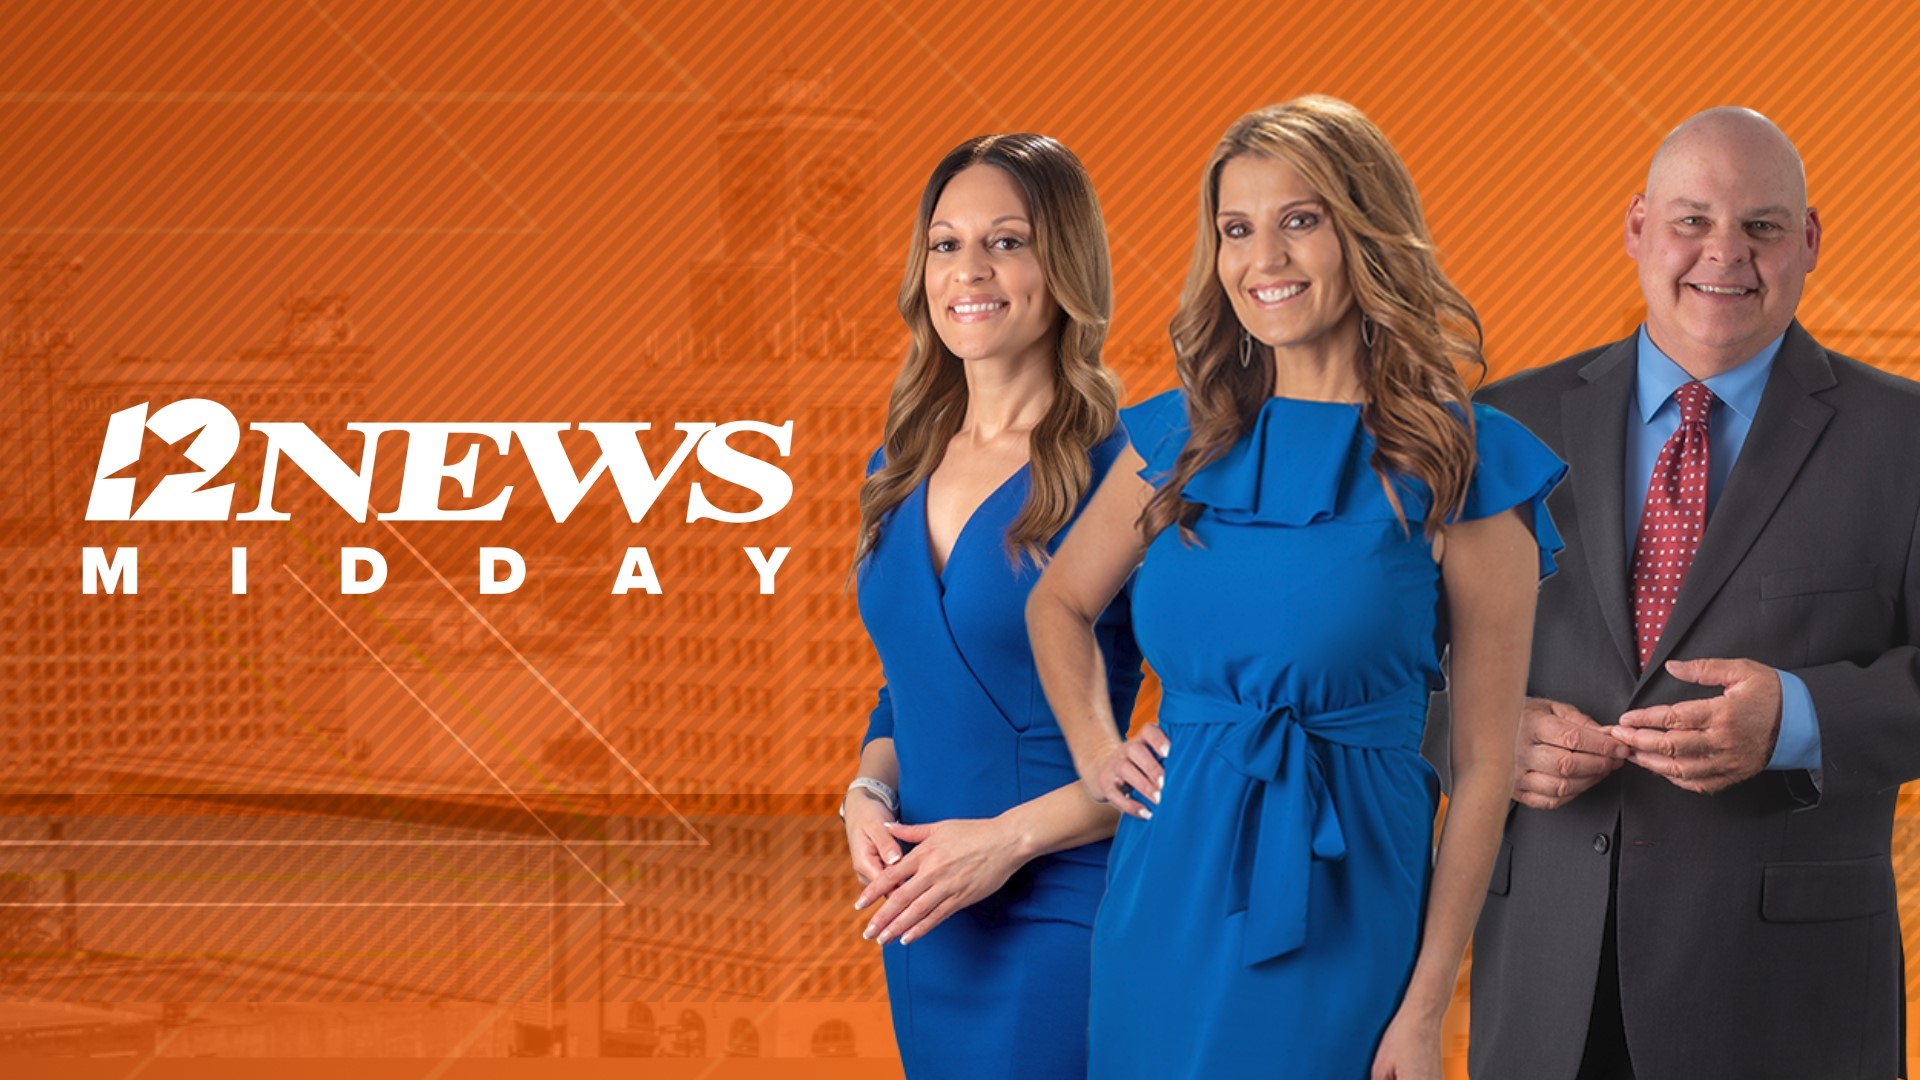 12News Midday provides updates to breaking overnight stories and weather for the day.